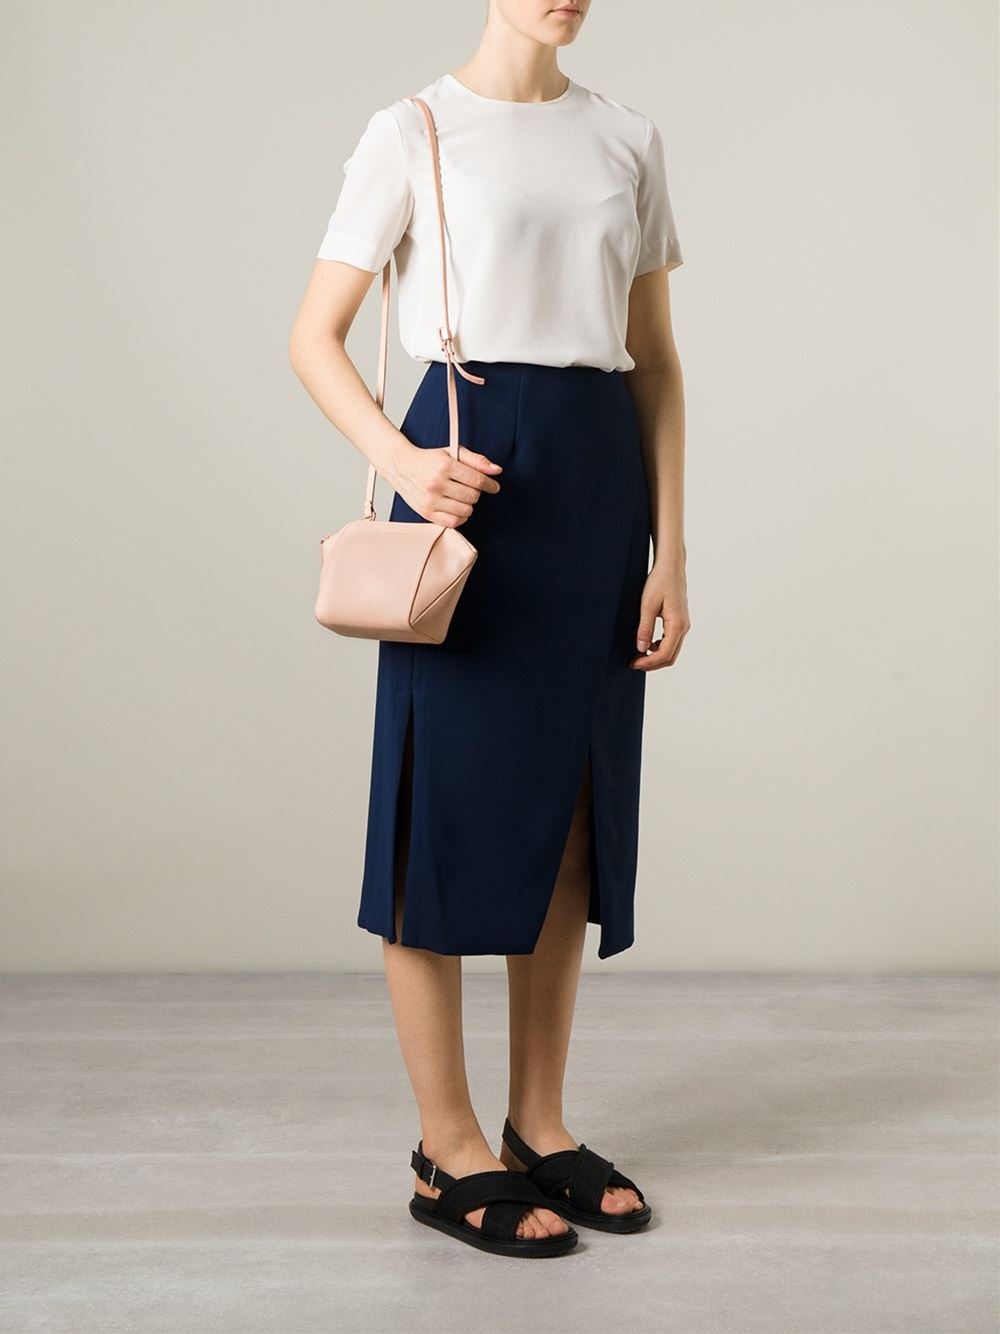 Lyst - Cedric charlier Trapeze-Shaped Calf-Leather Shoulder Bag in Pink